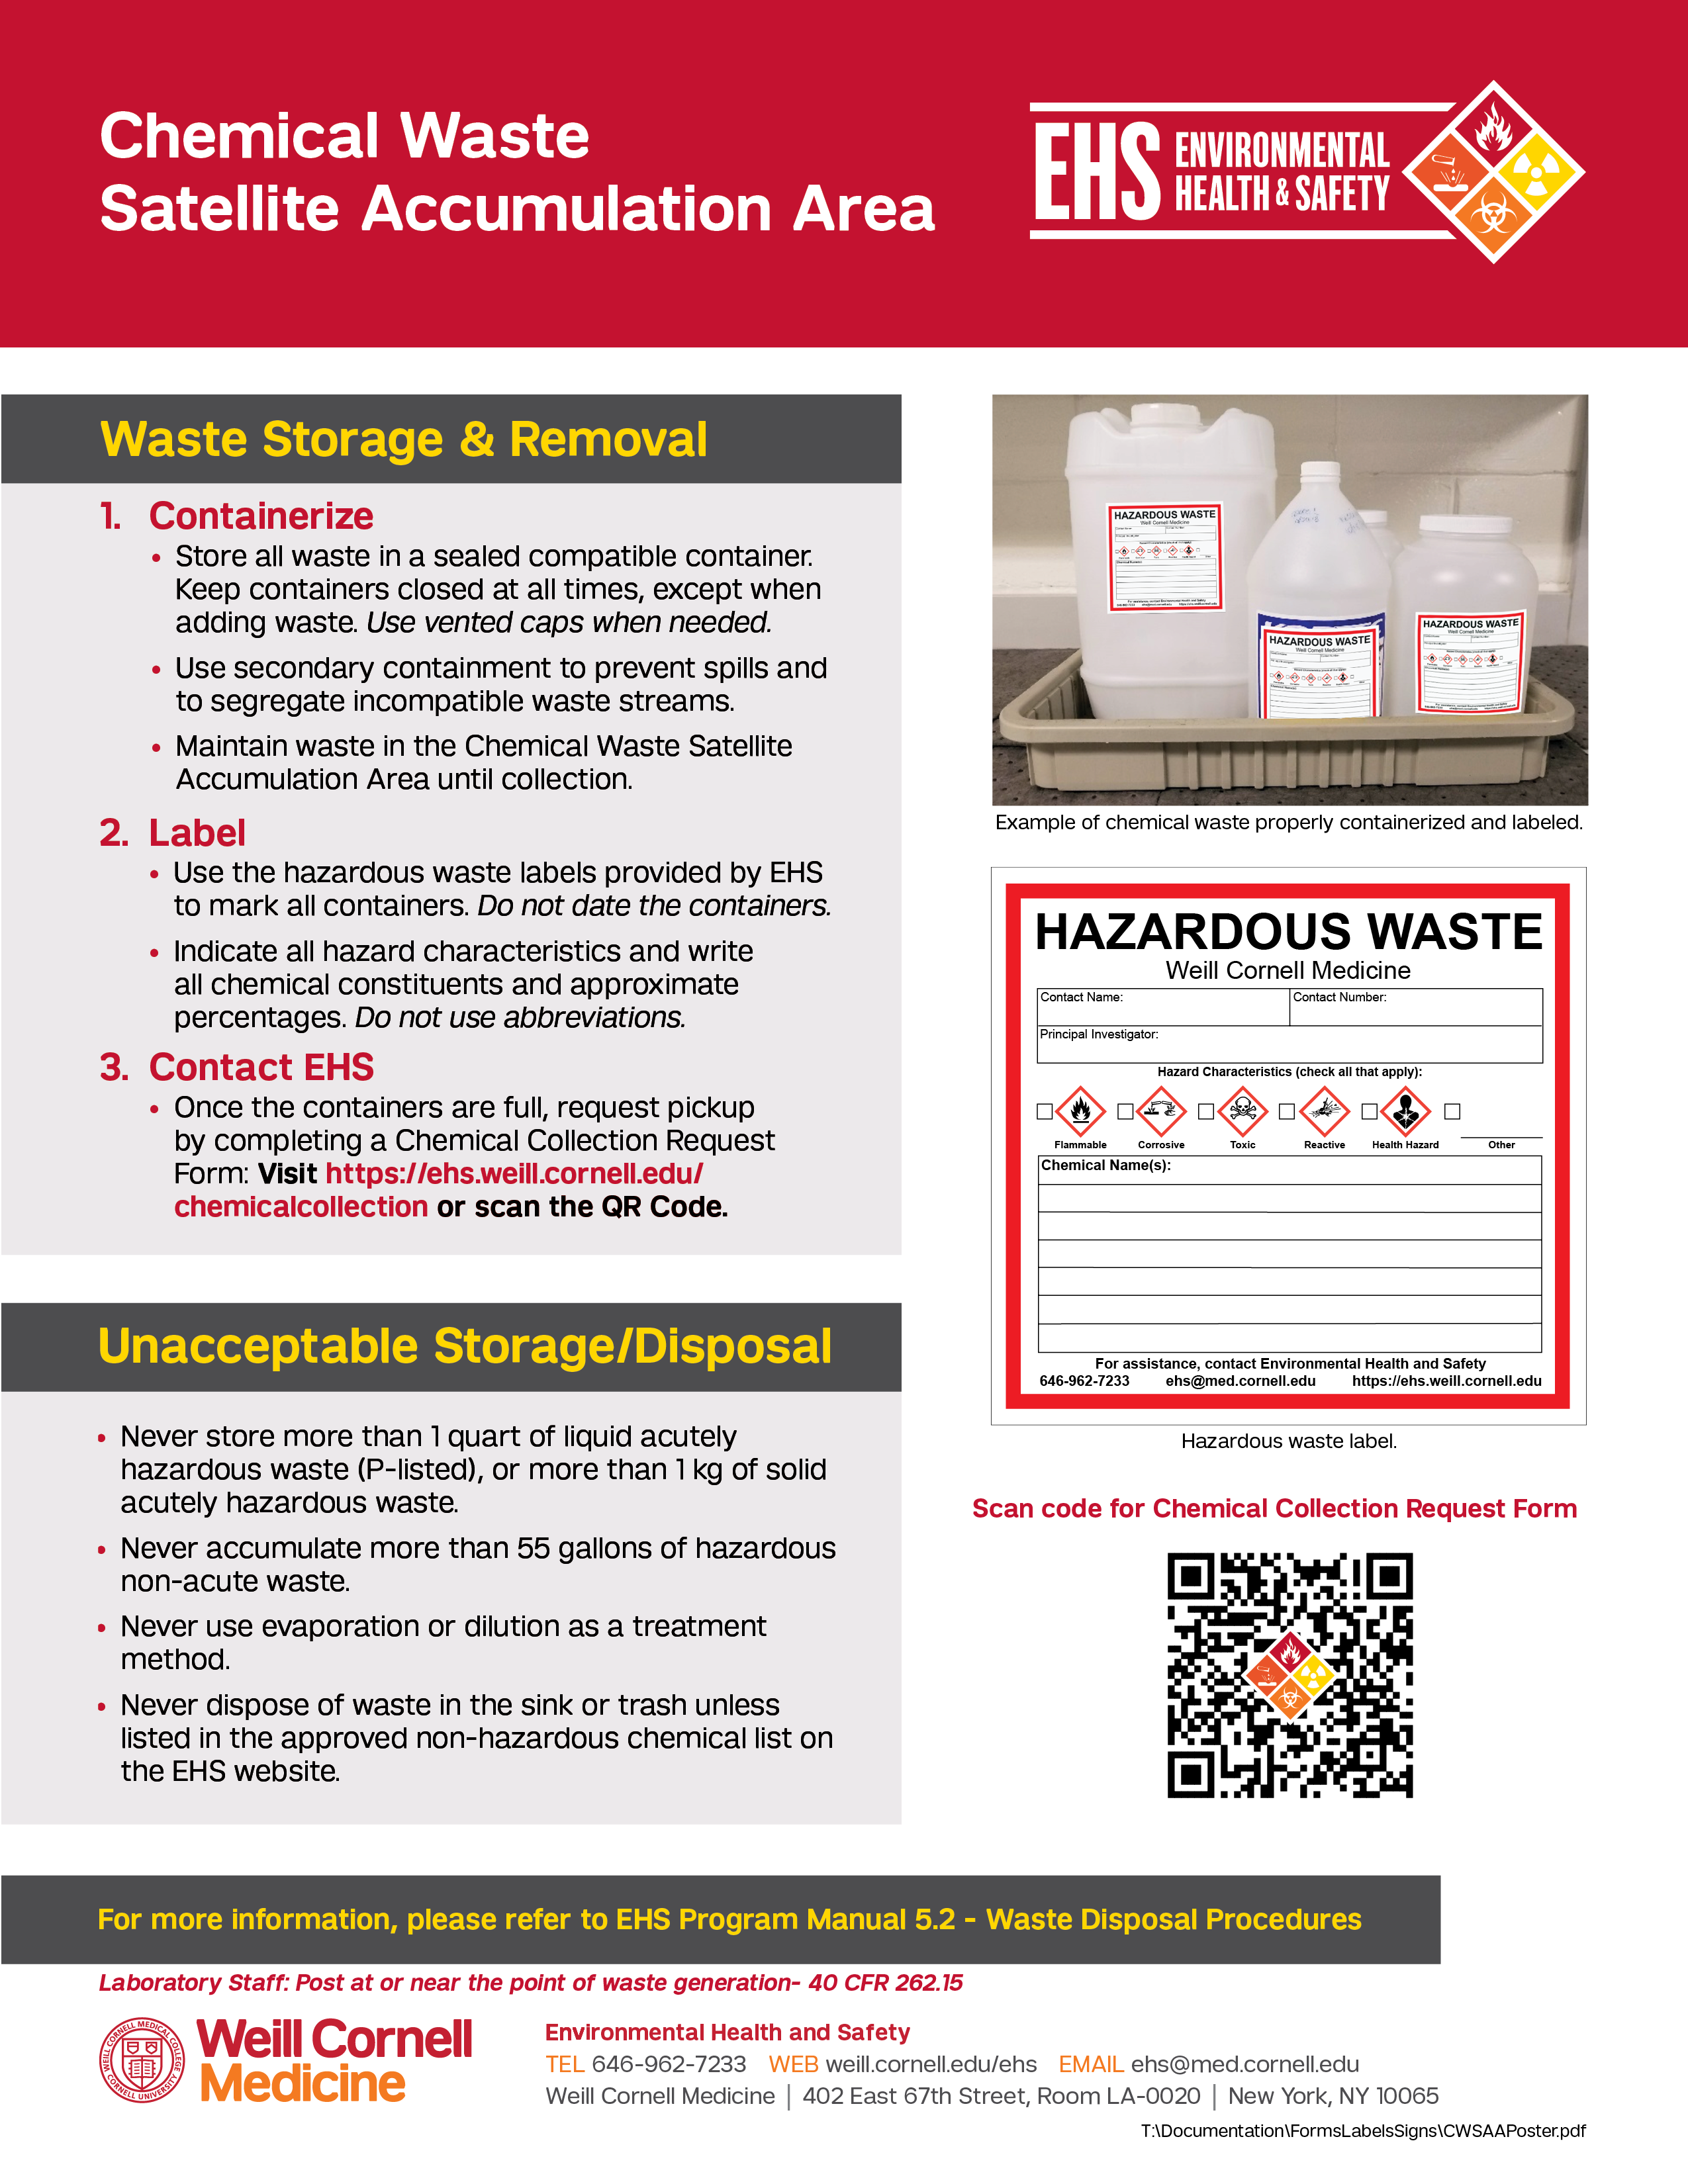 EHS Chemical Waste Satellite Accumulation Area Poster